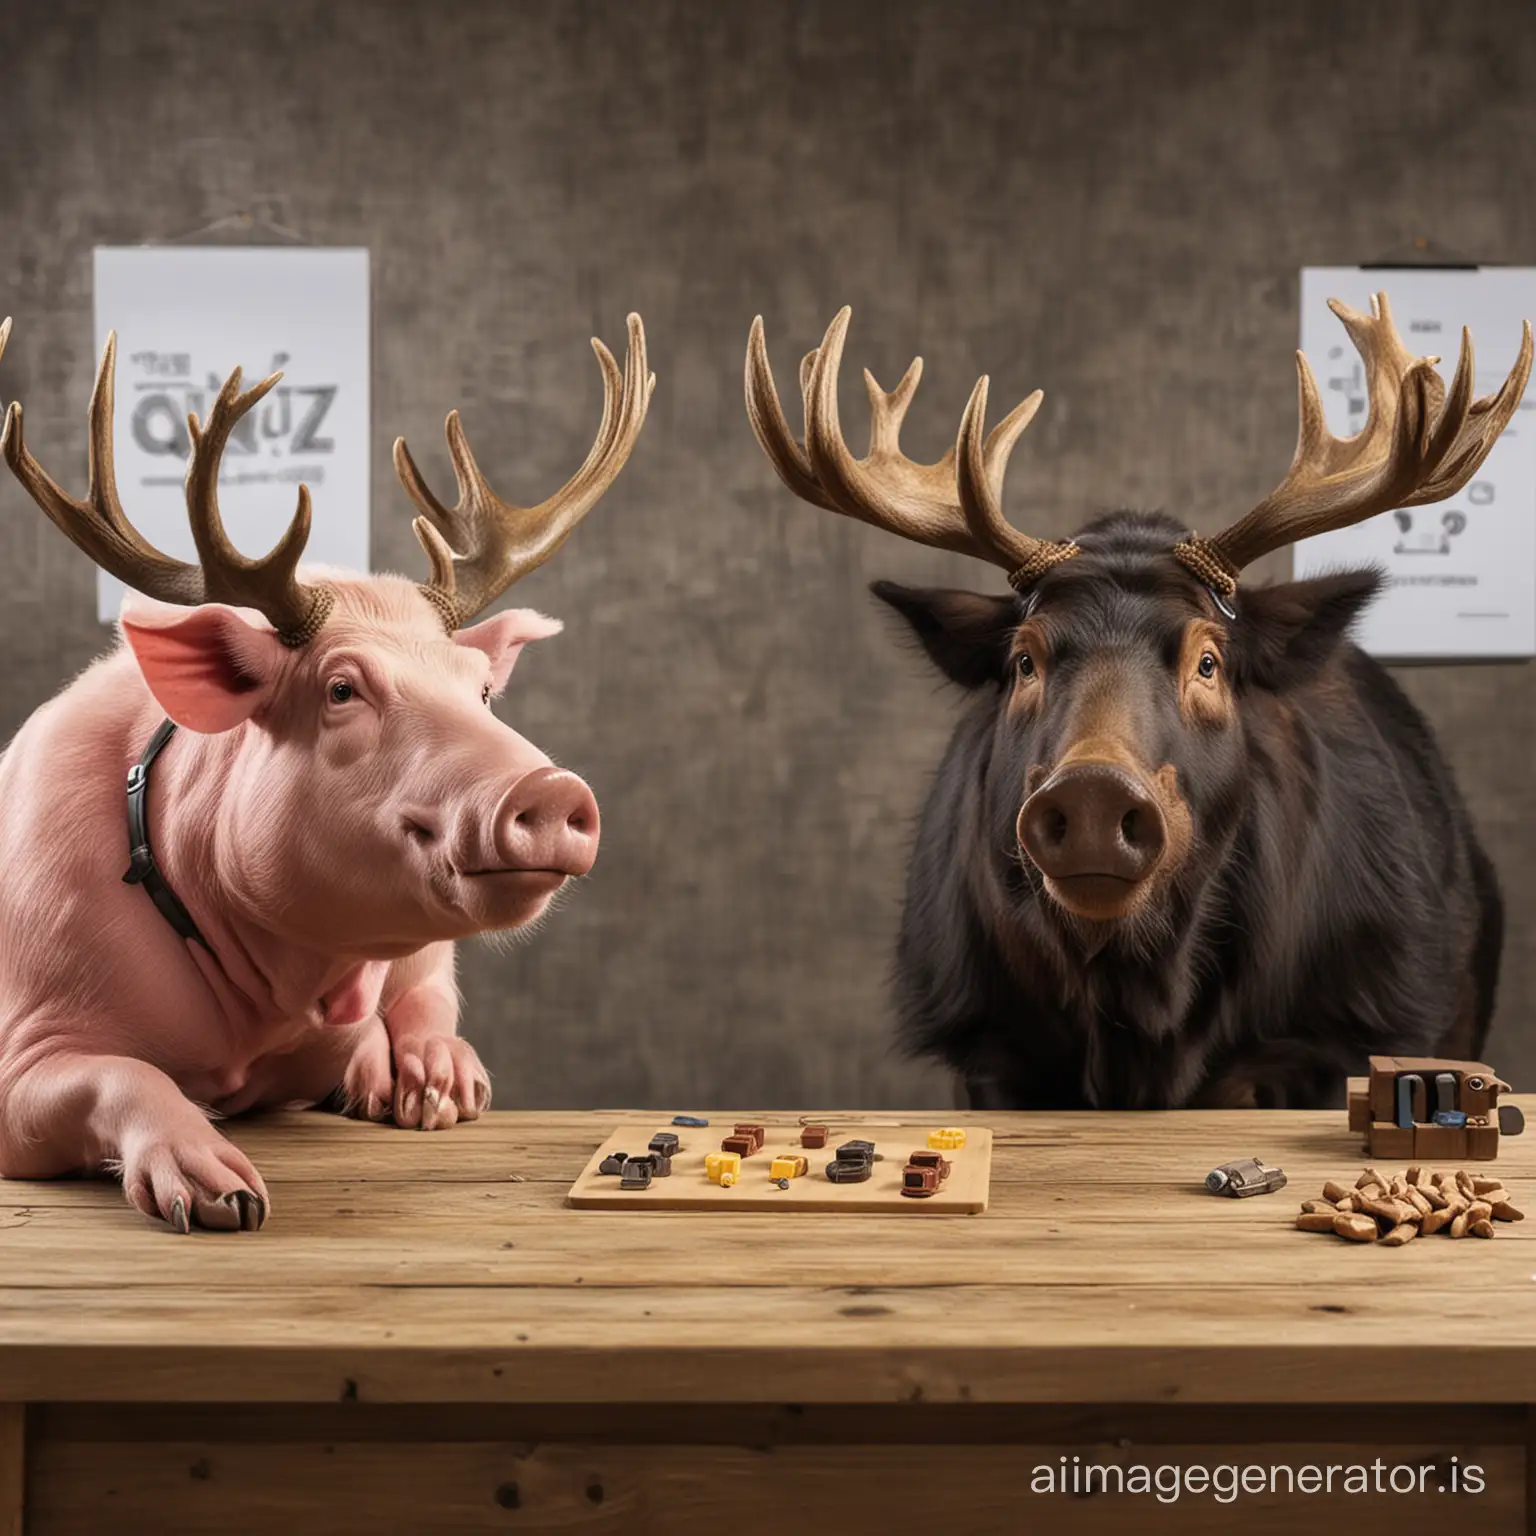 MoosePig-Hybrid-Competes-in-Quiz-Show-in-Colorful-Game-Studio-Setting